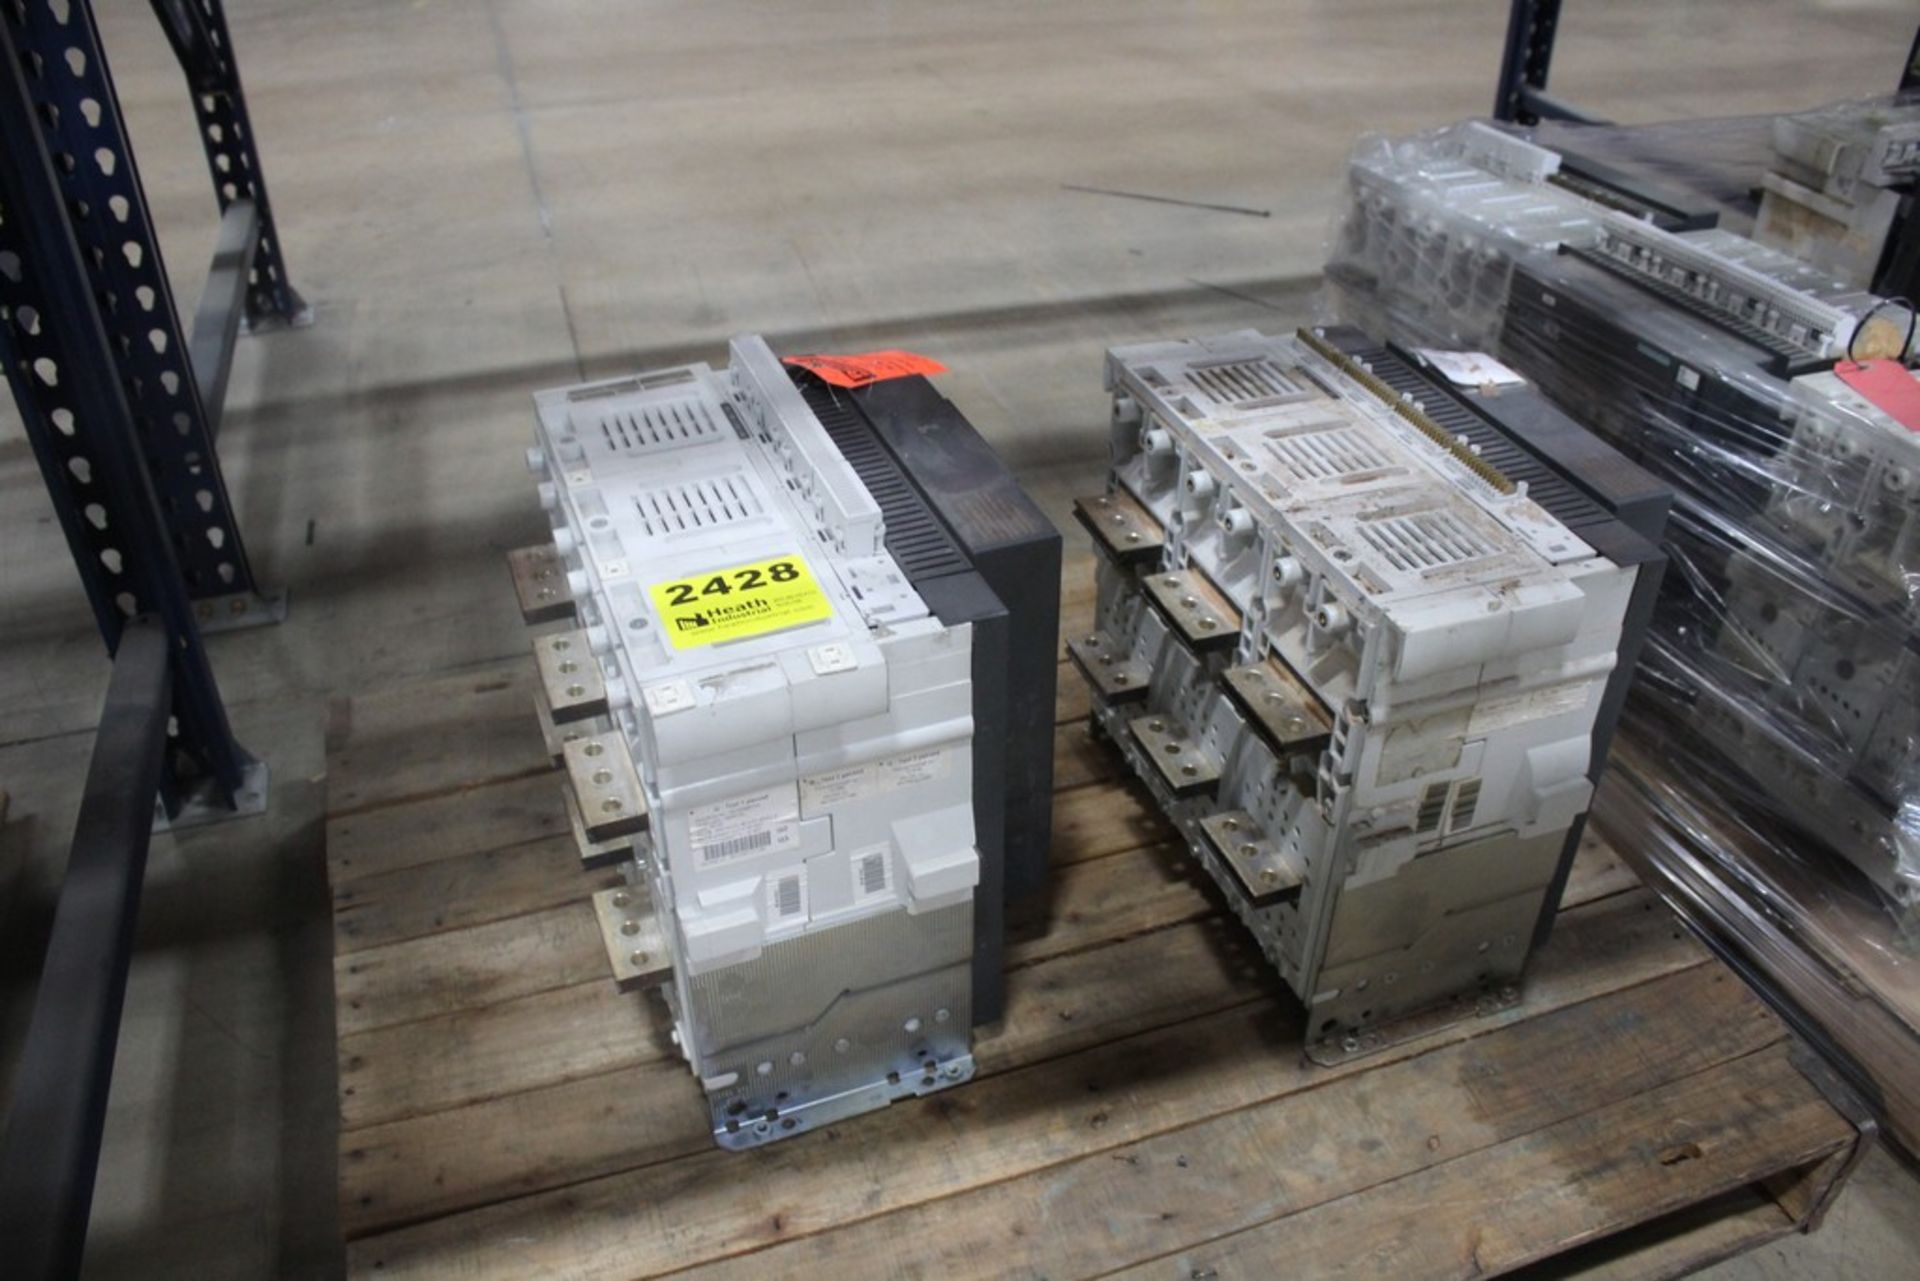 LARGE QUANTITY OF PITCHMASTER CONTROL BOXES ON PALLET - Image 2 of 2